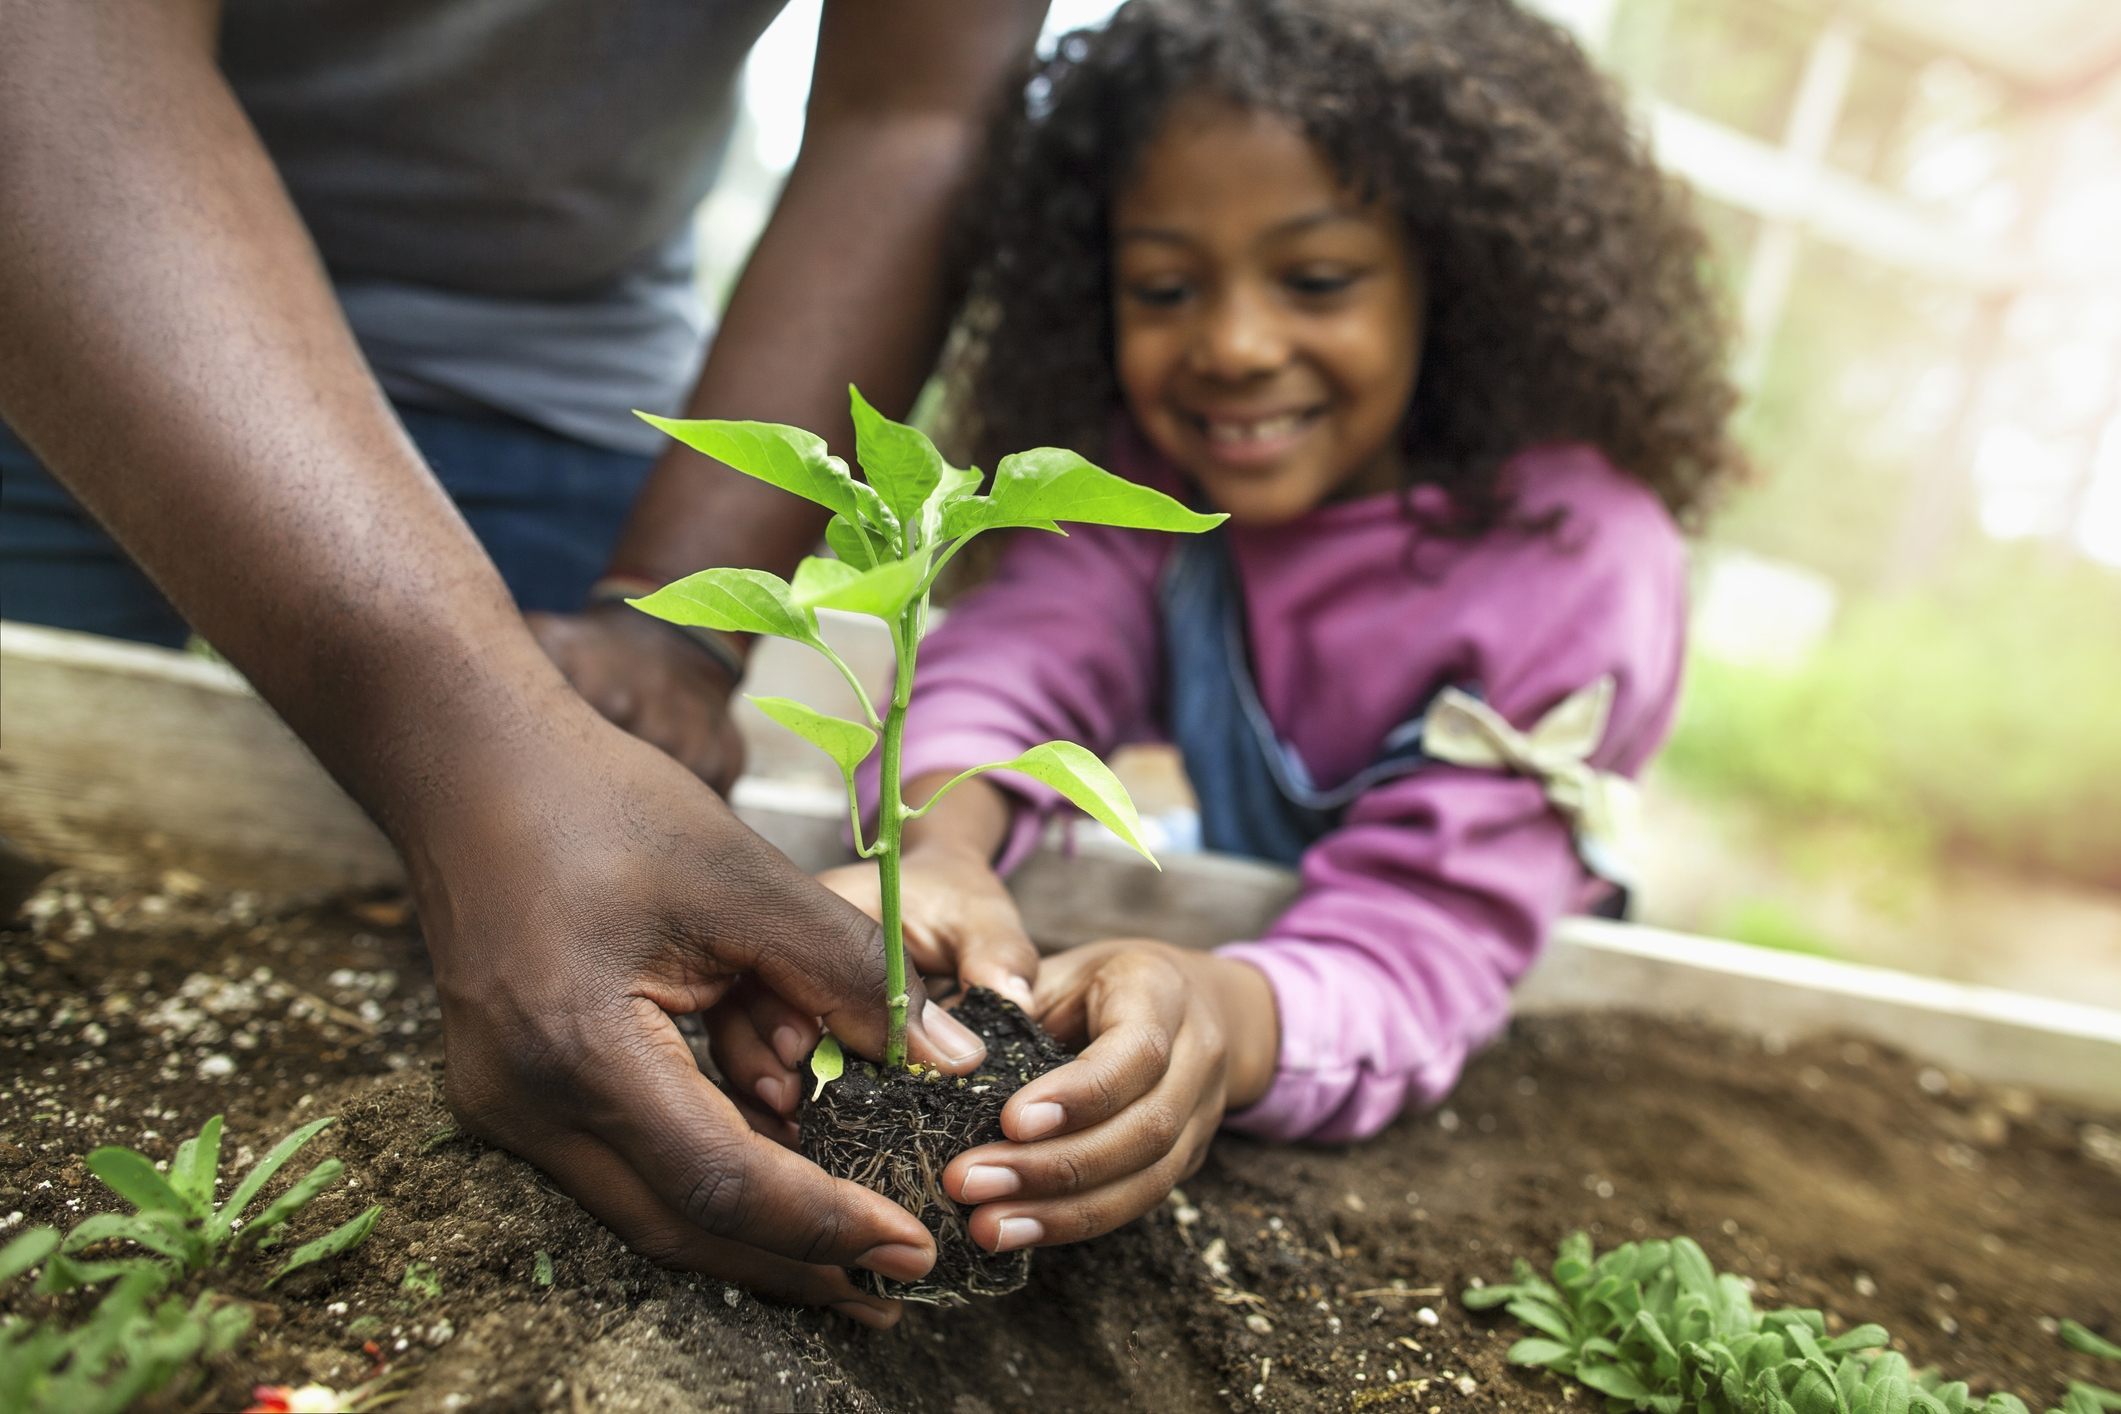 A smiling girl plants a plant in the dirt with help from her father.